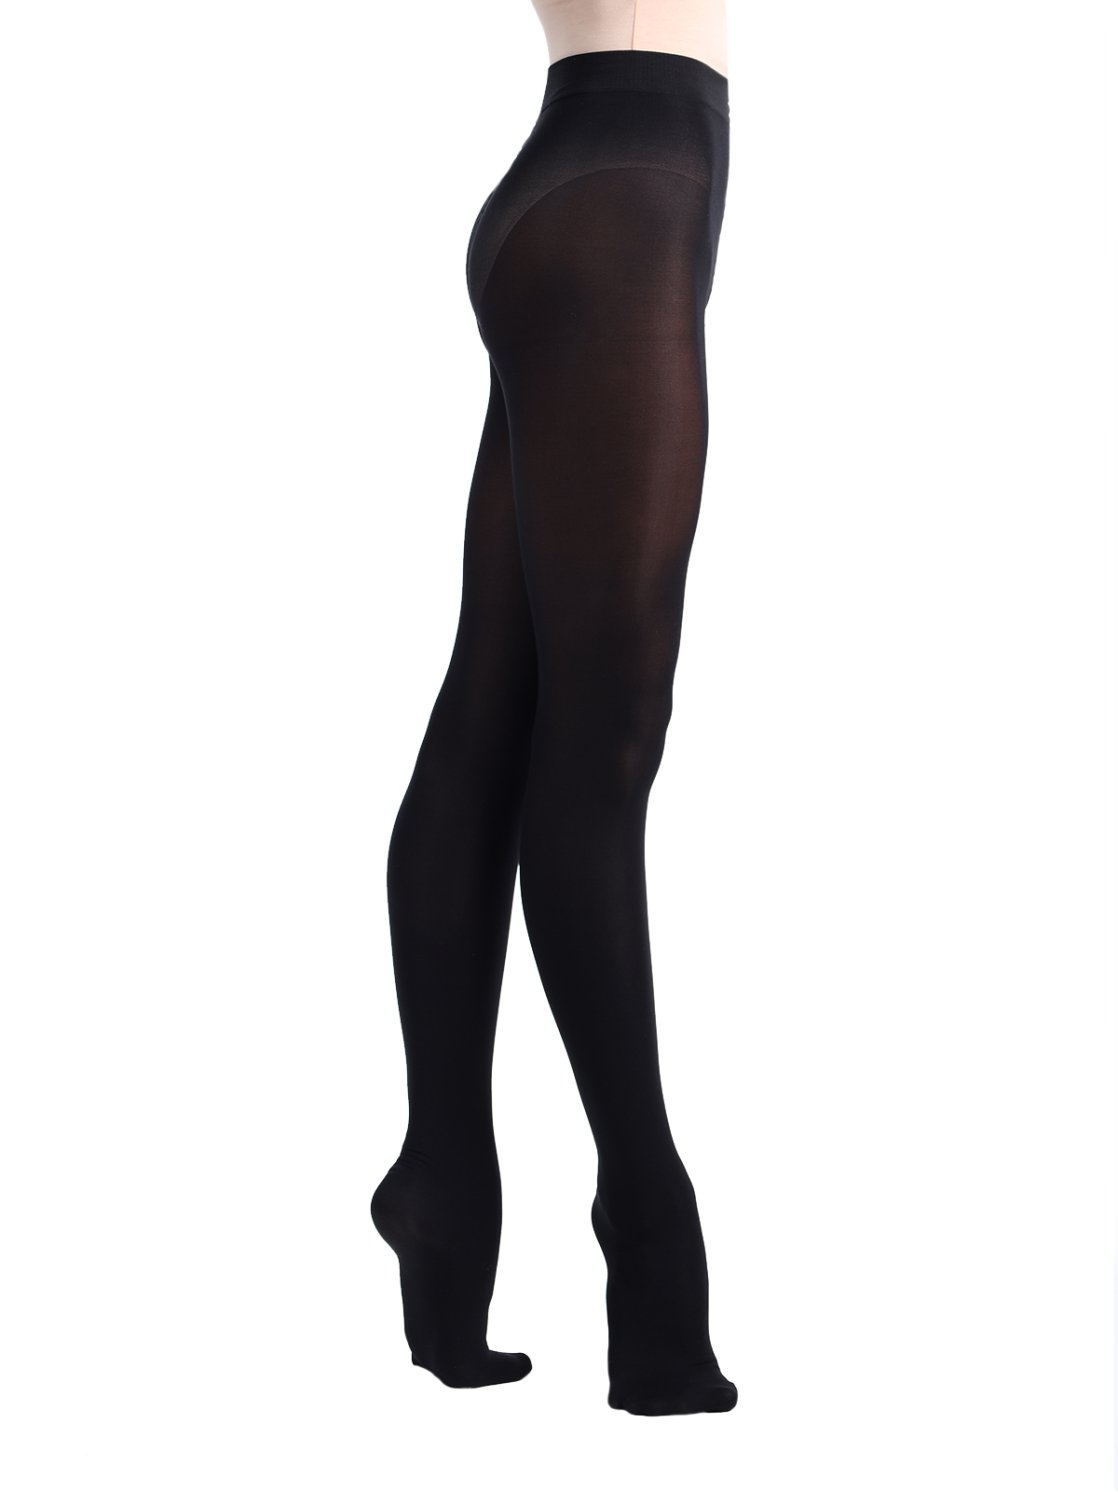 Black tights with closed leg 40 DEN